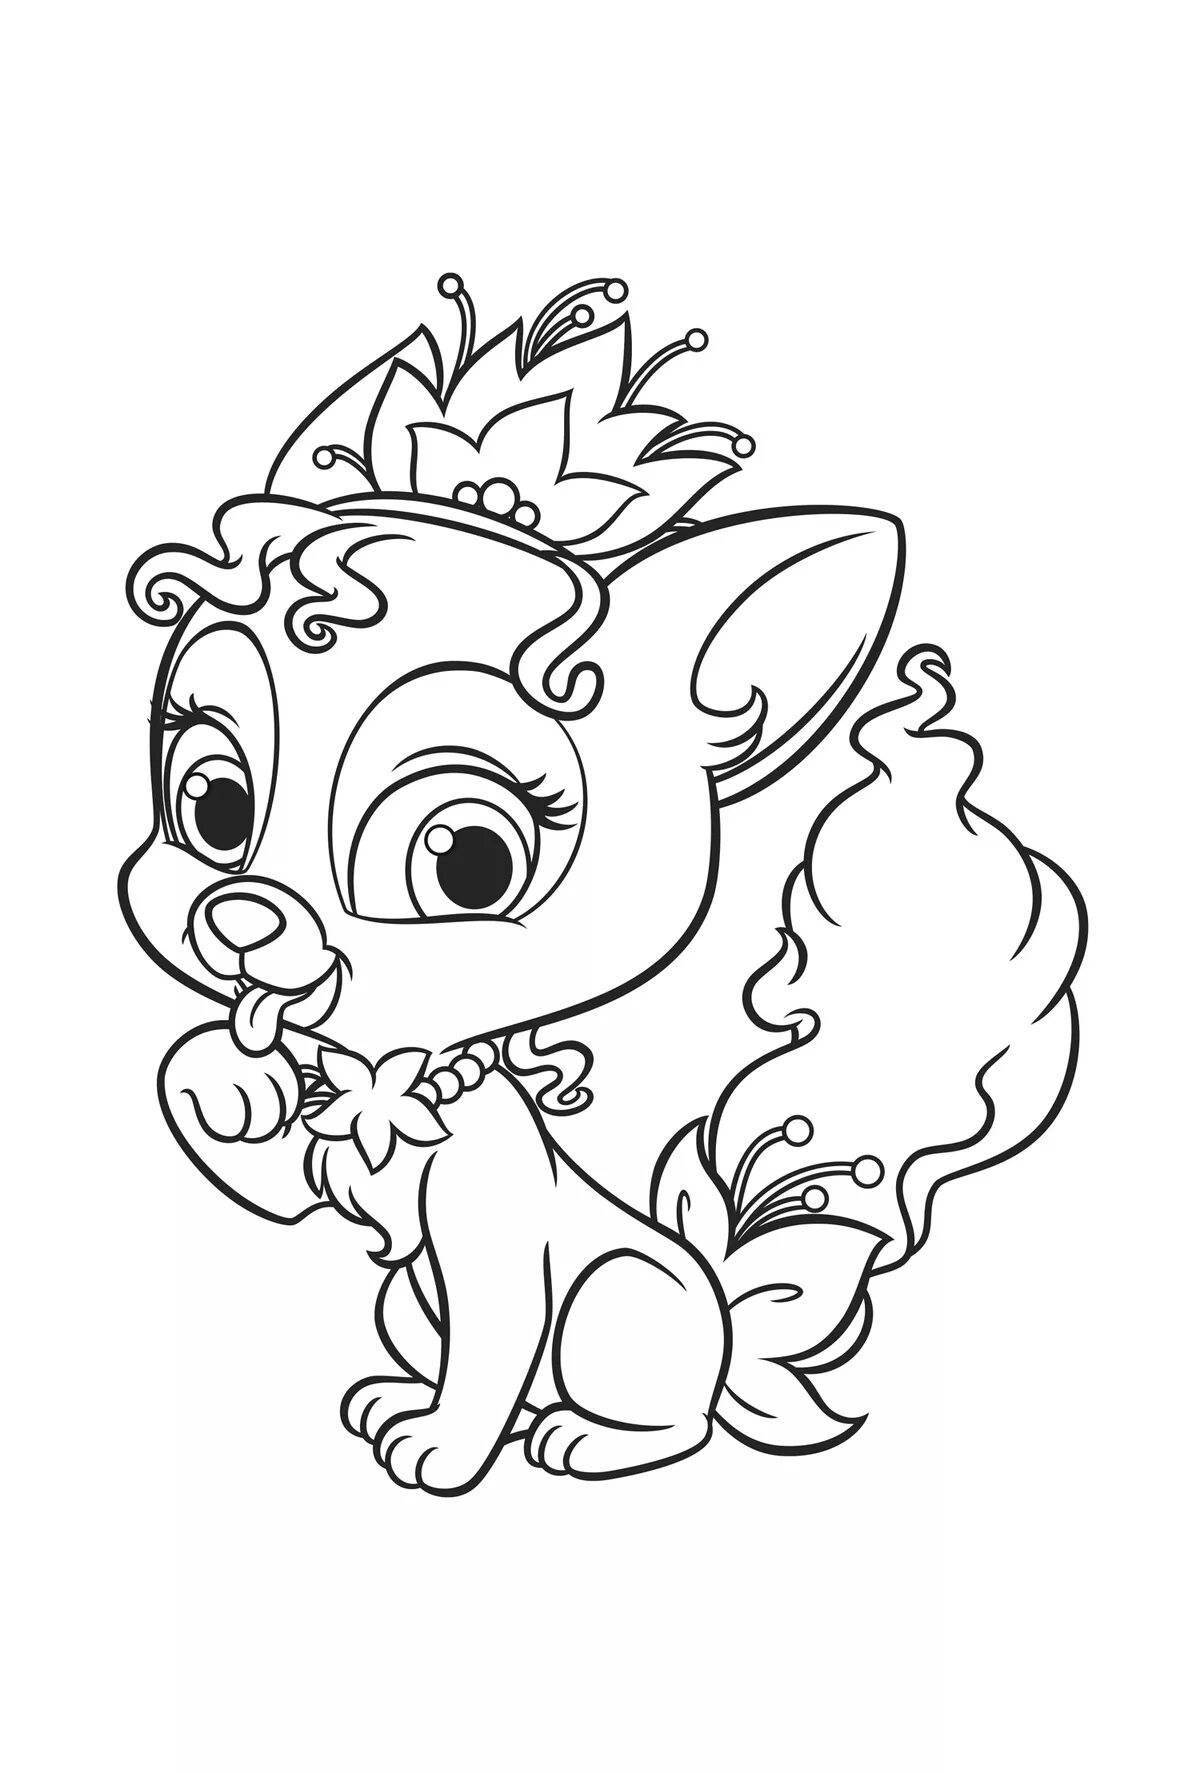 Coloring book noble cat with a crown